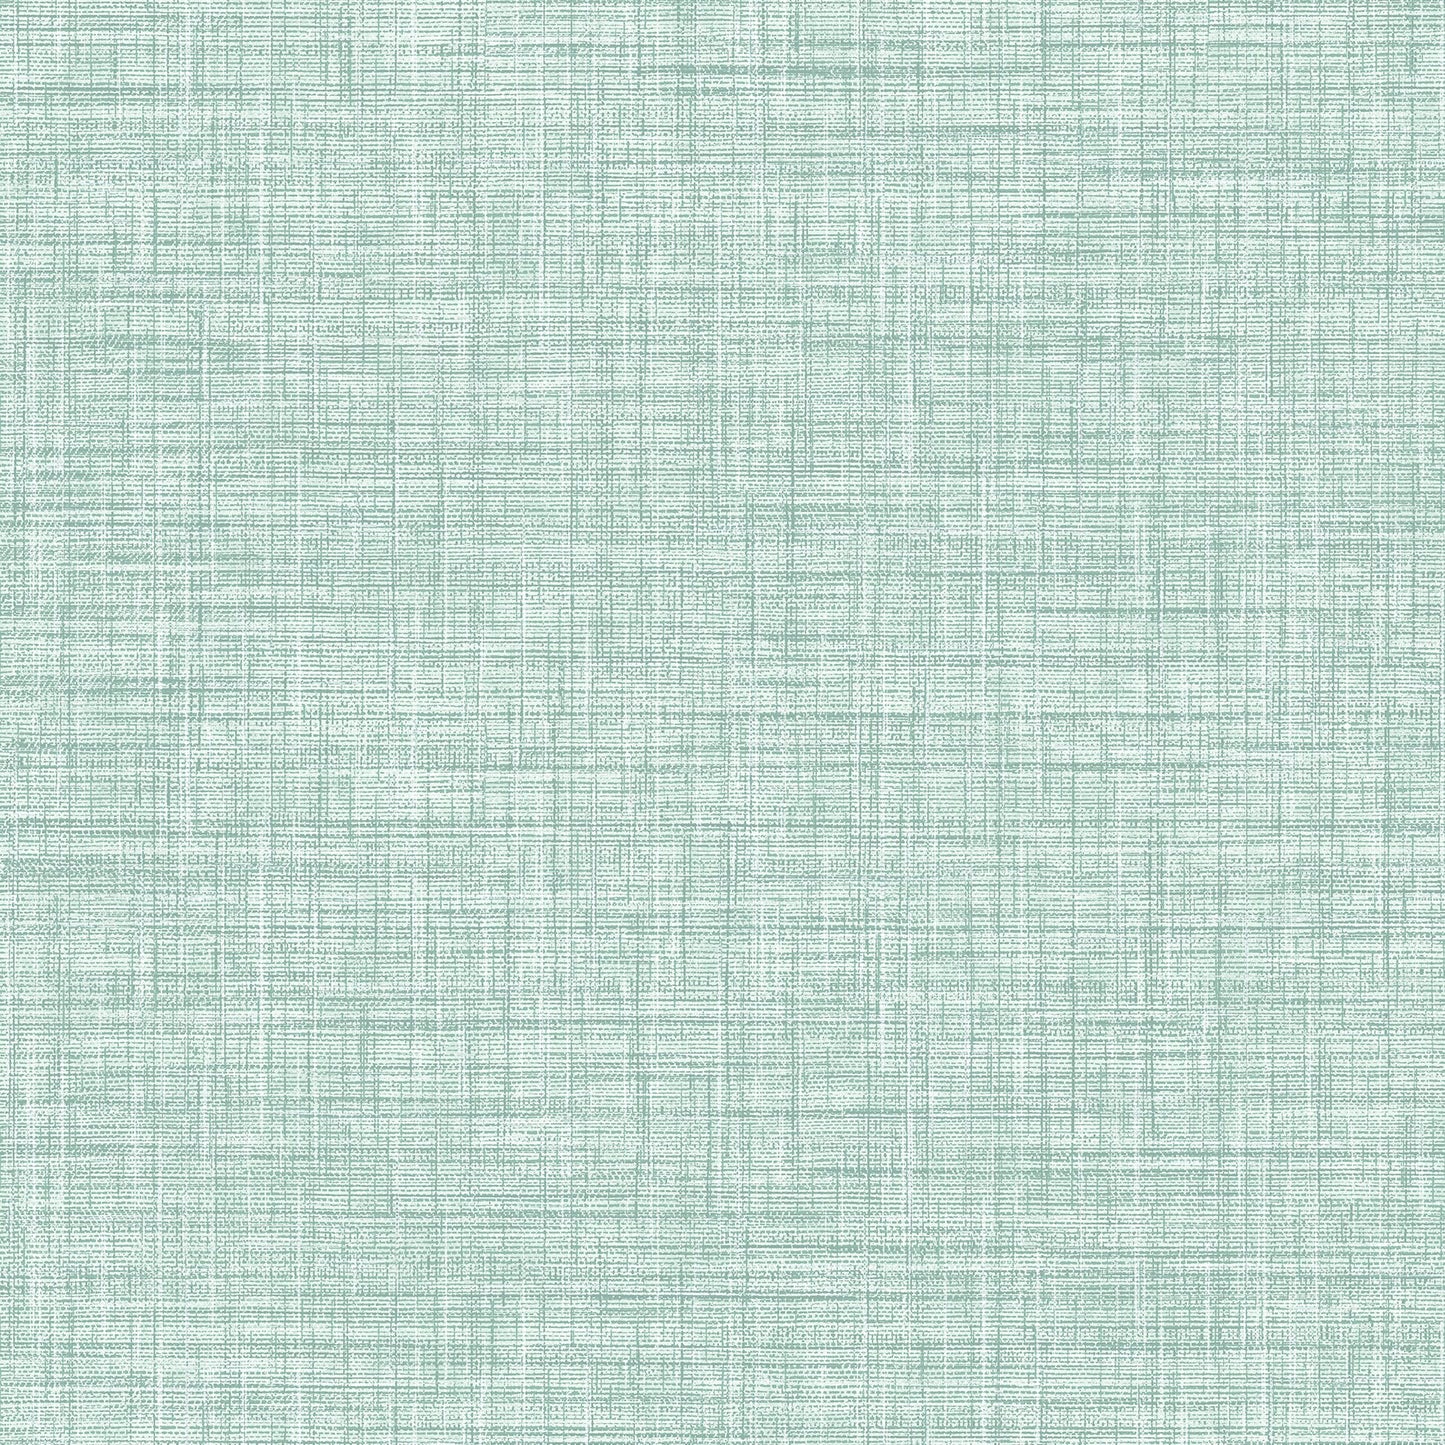 View 2767-24271 Tuckernuck Teal Linen Techniques & Finishes III Brewster